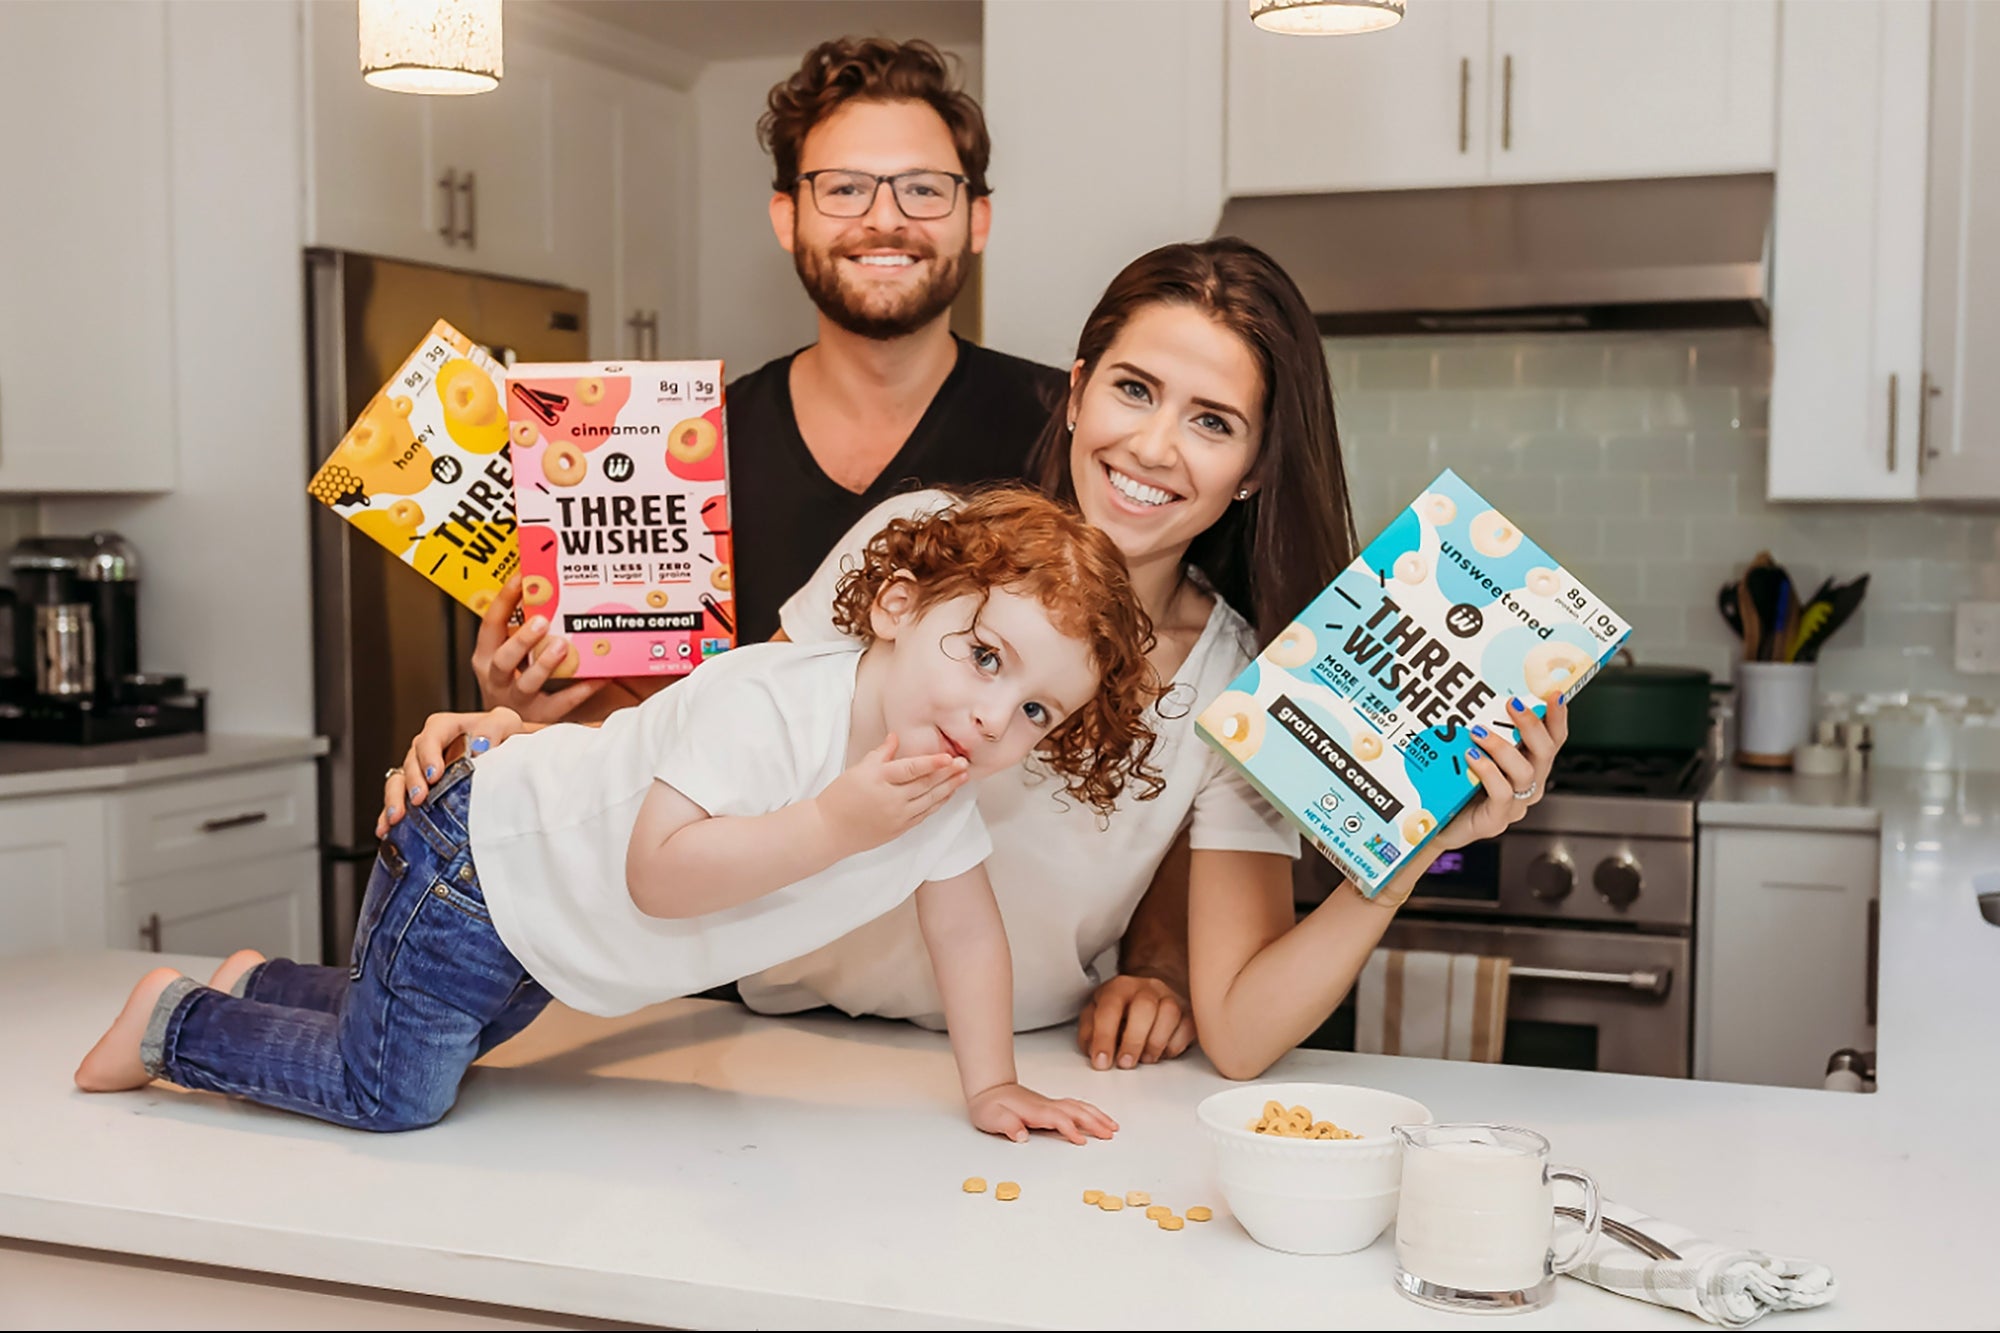 In Just One Year, This Cereal Creator Grew a Multi-Million Dollar Brand That's Now Stocked in Whole Foods Nationwide